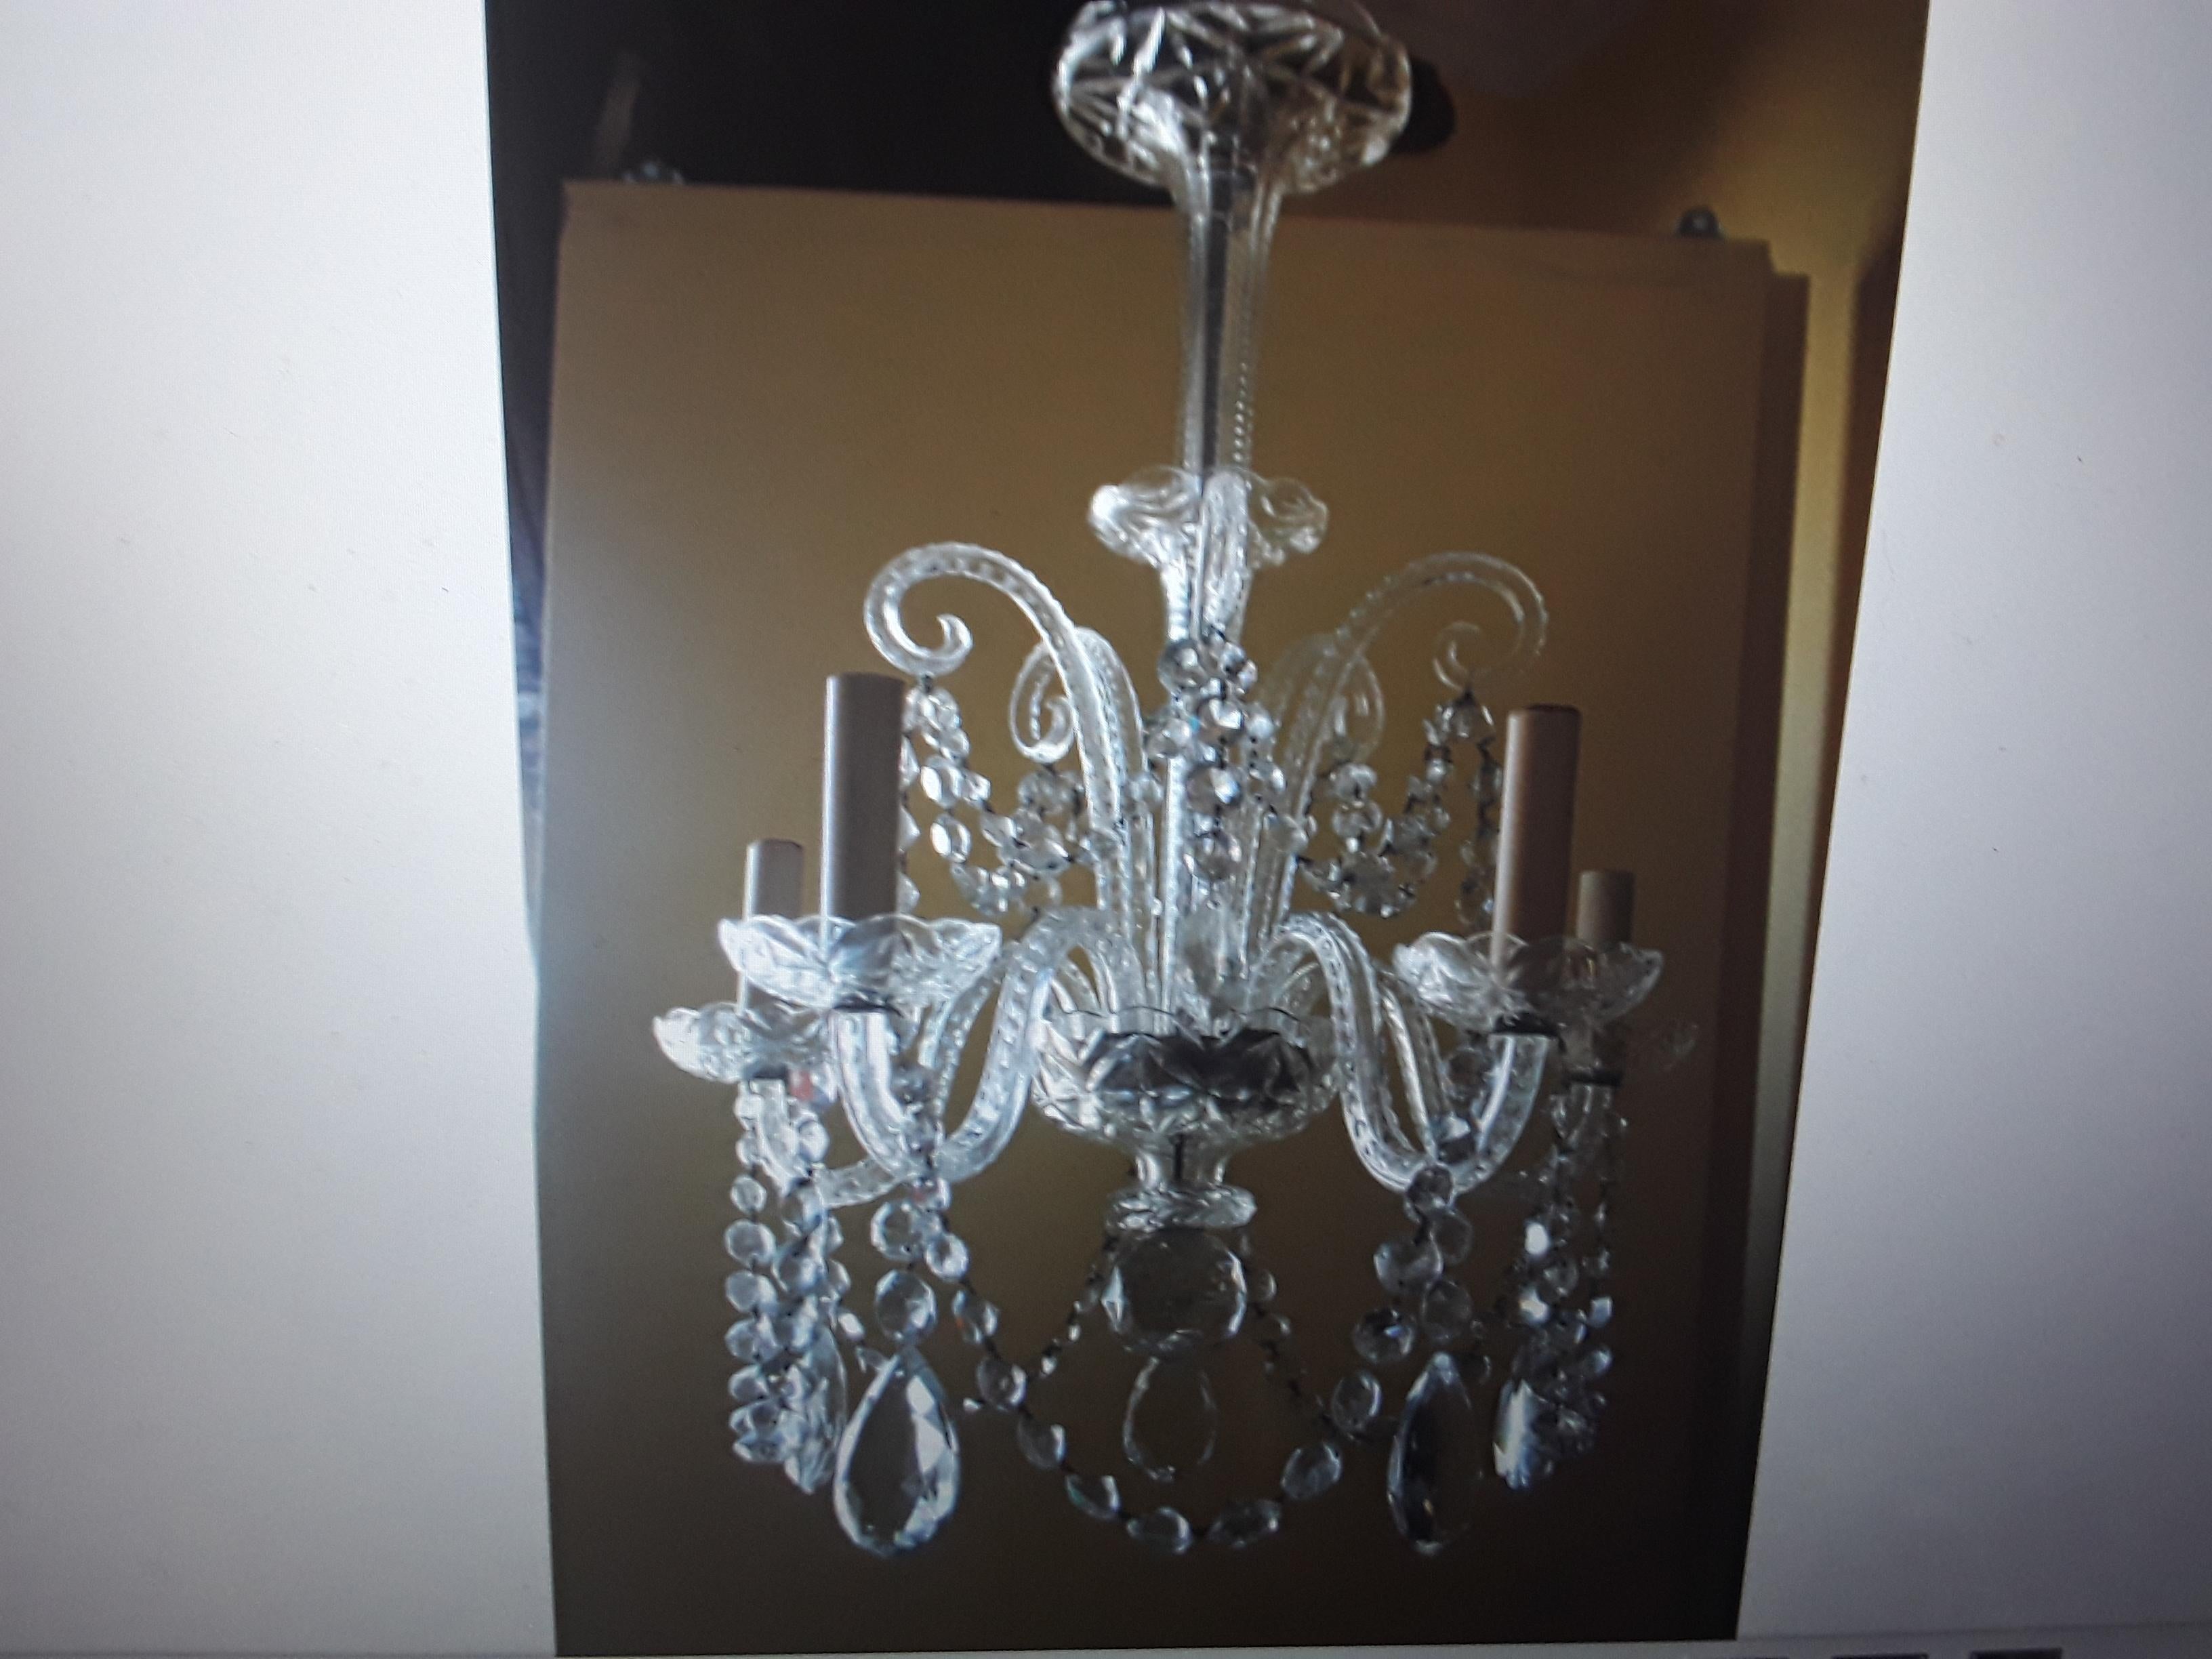 c1890-1900 Antique Anglo-Irish Traditional Cut Leaded Crystal Chandelier For Sale 6